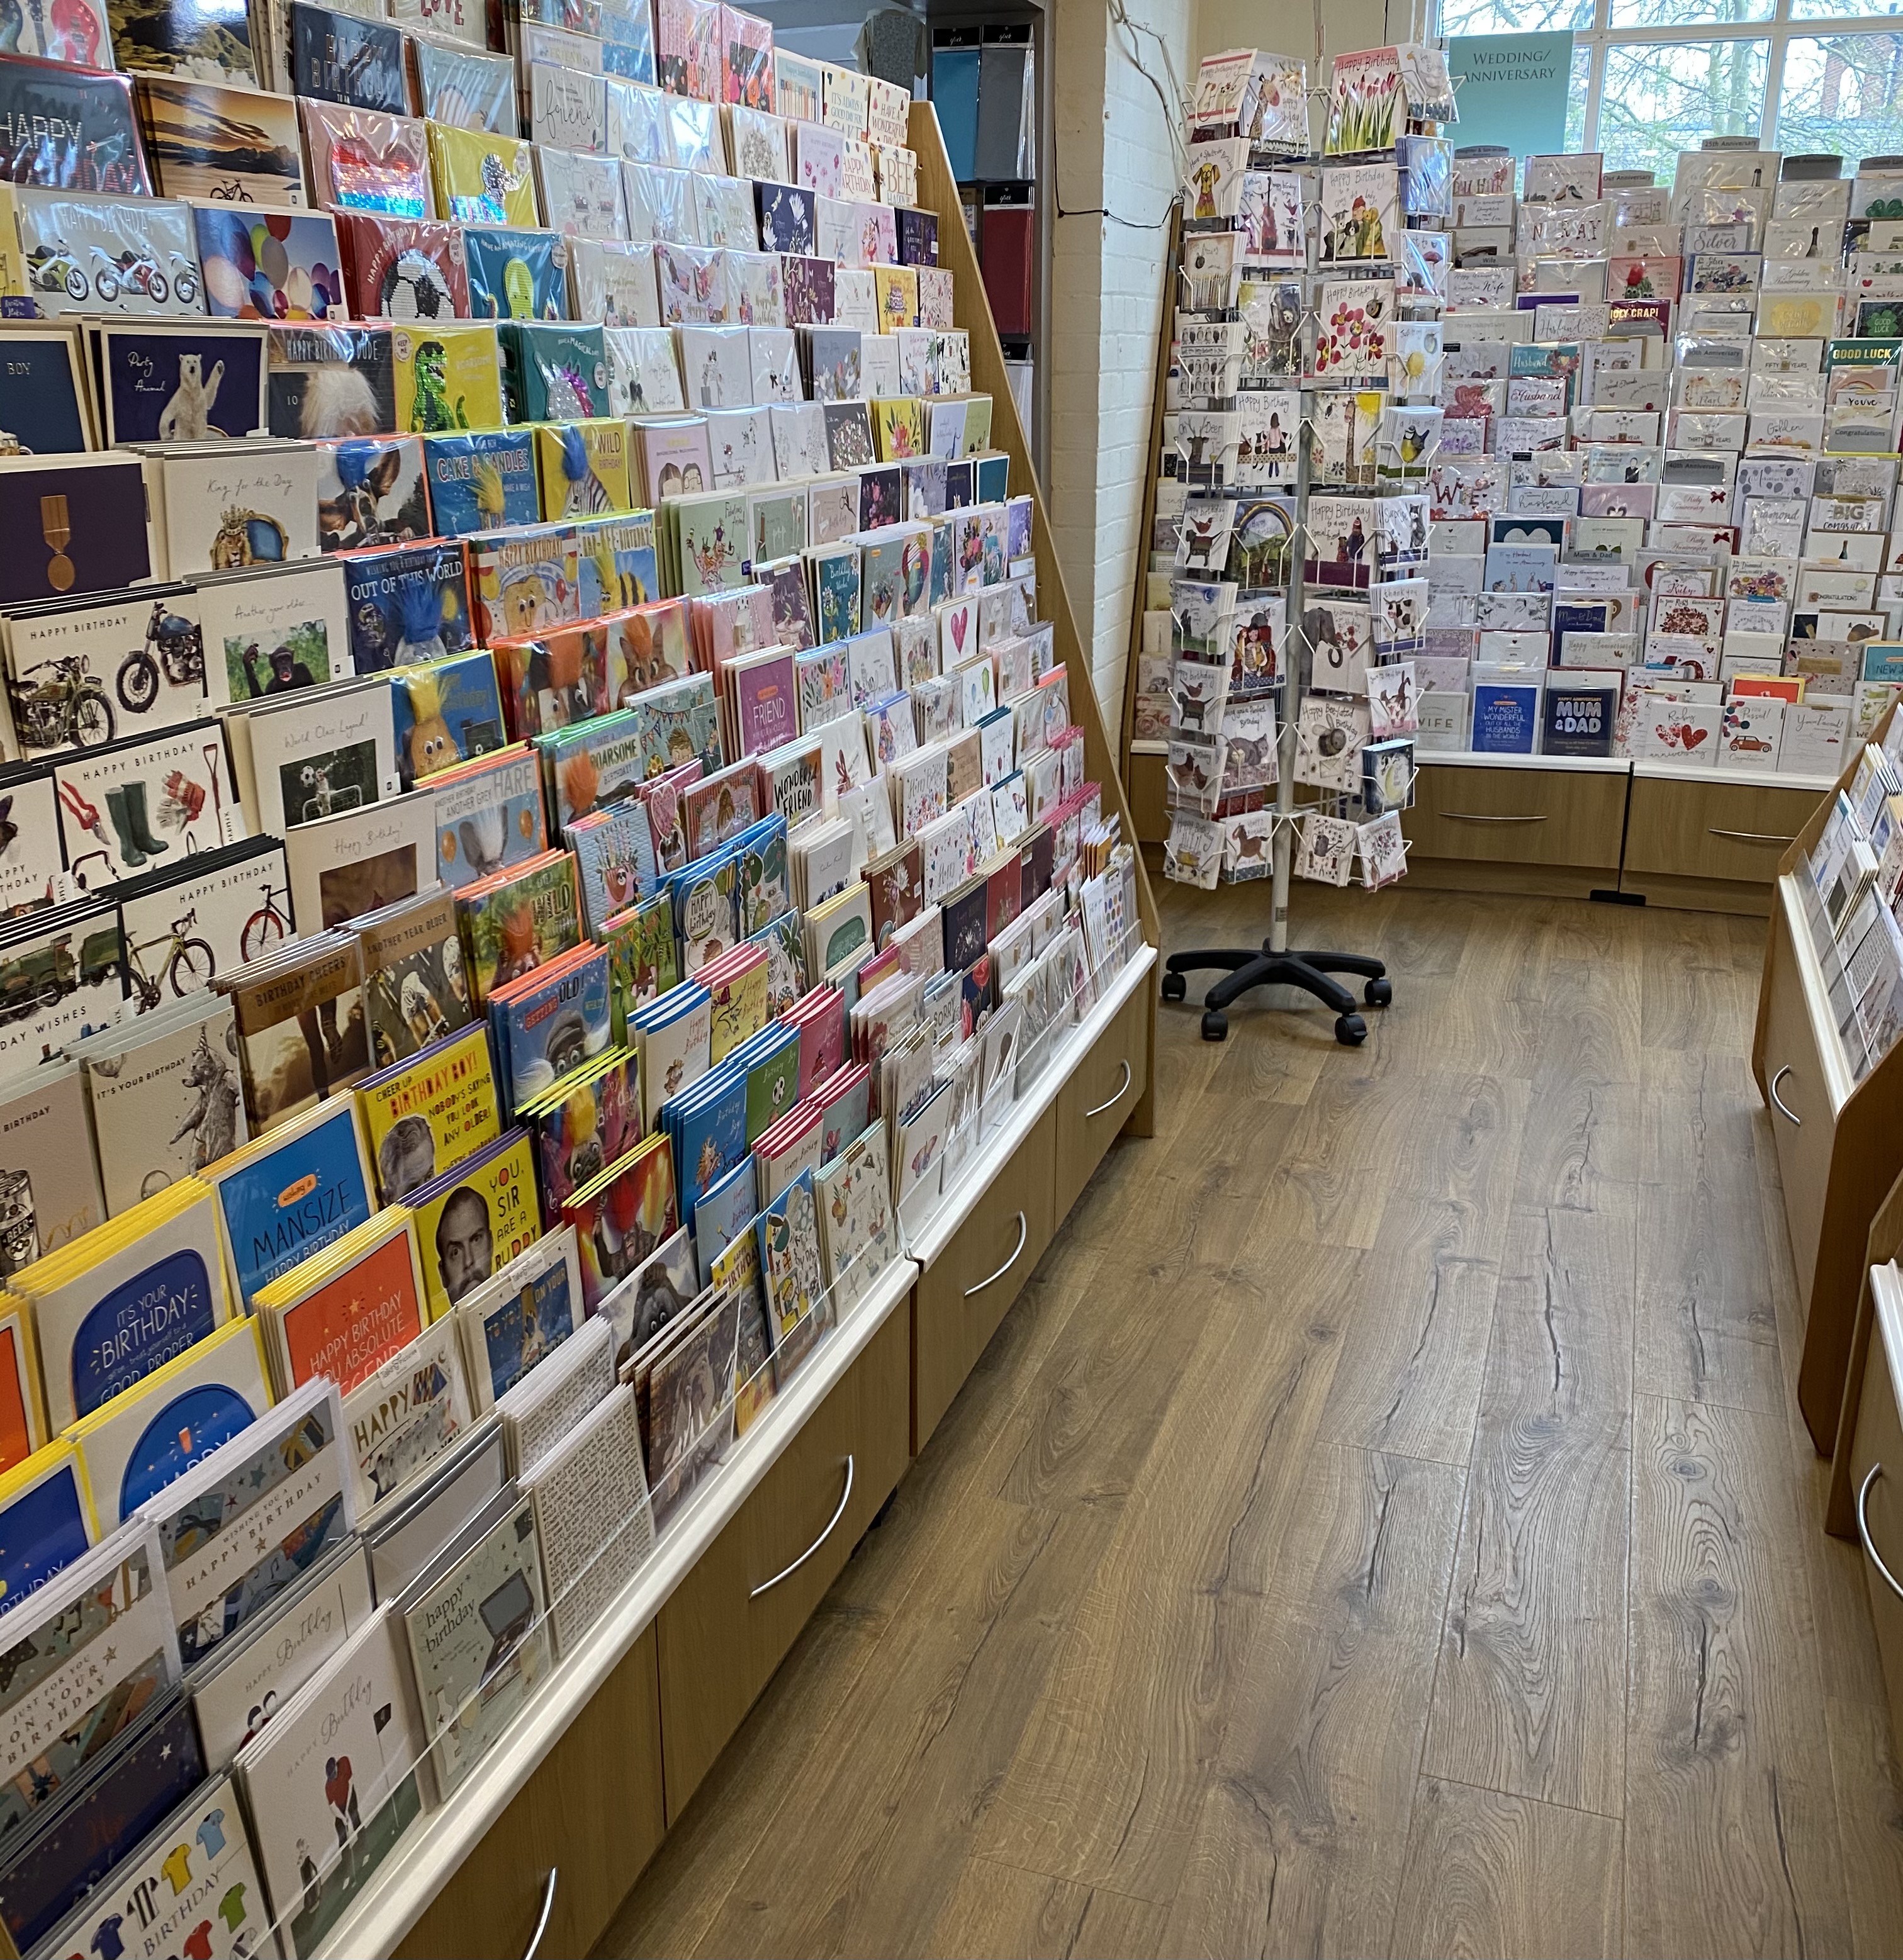 Above and below: The Tutbury Present Company was brimming with new cards and gifts on reopening.